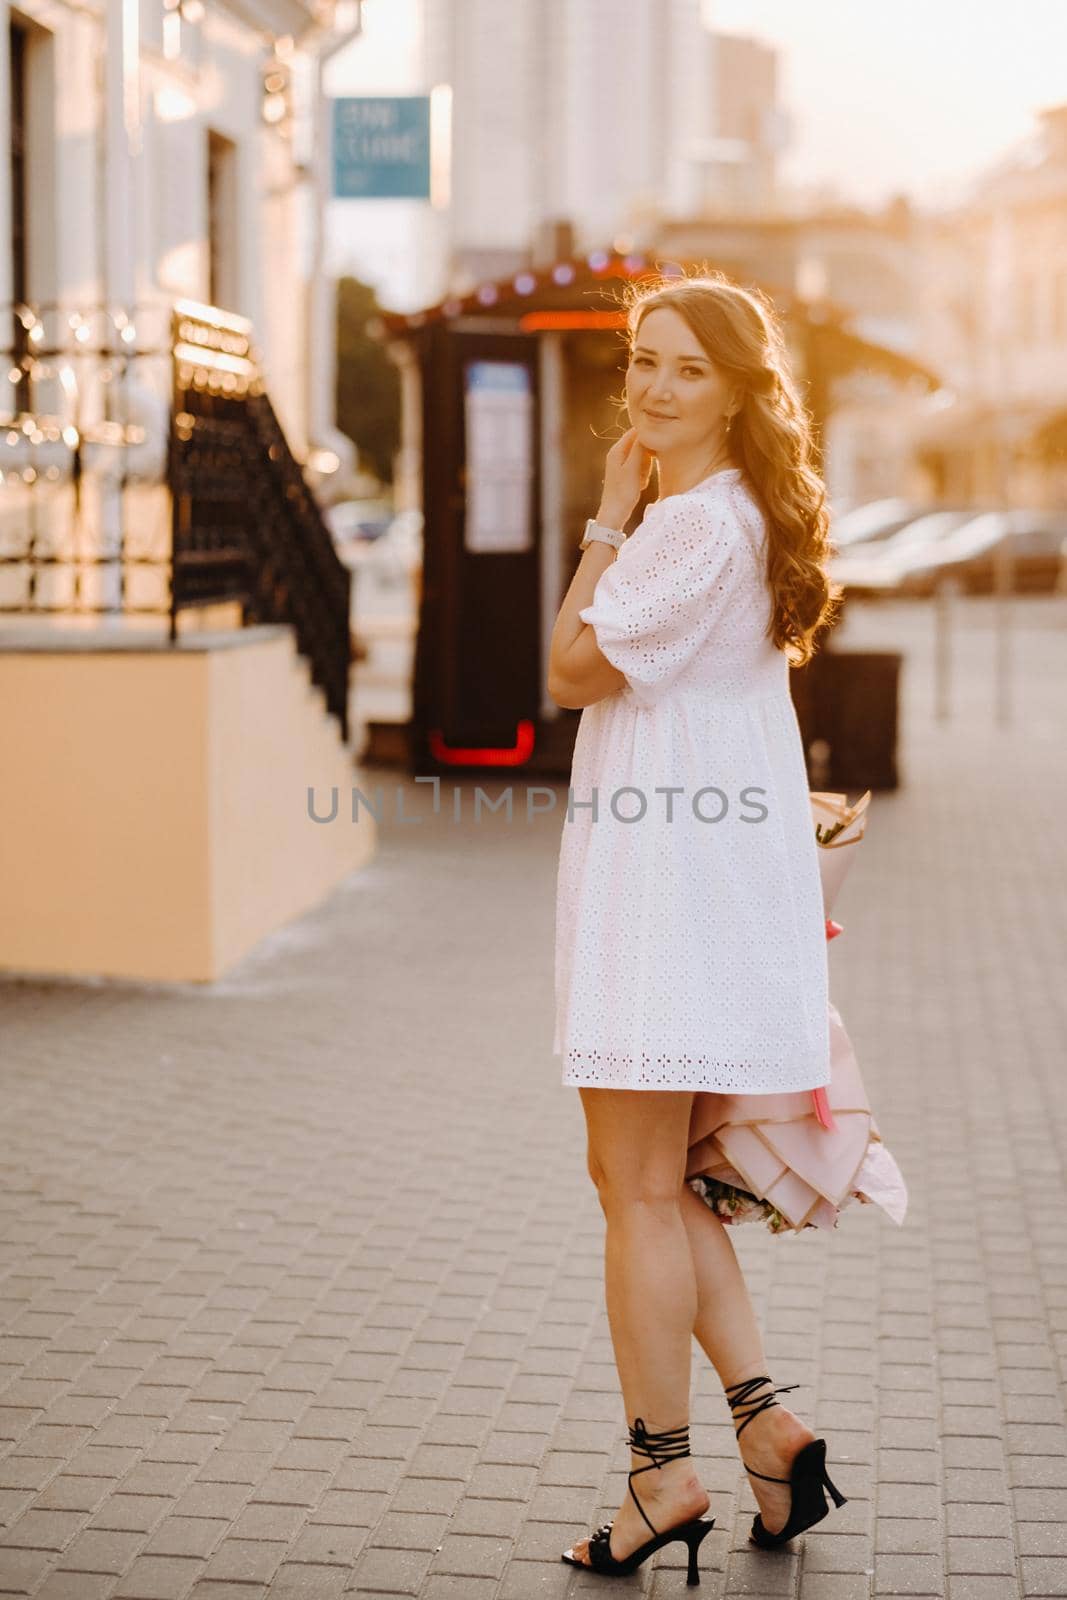 A happy woman in a white dress at sunset with a bouquet of flowers in the city.